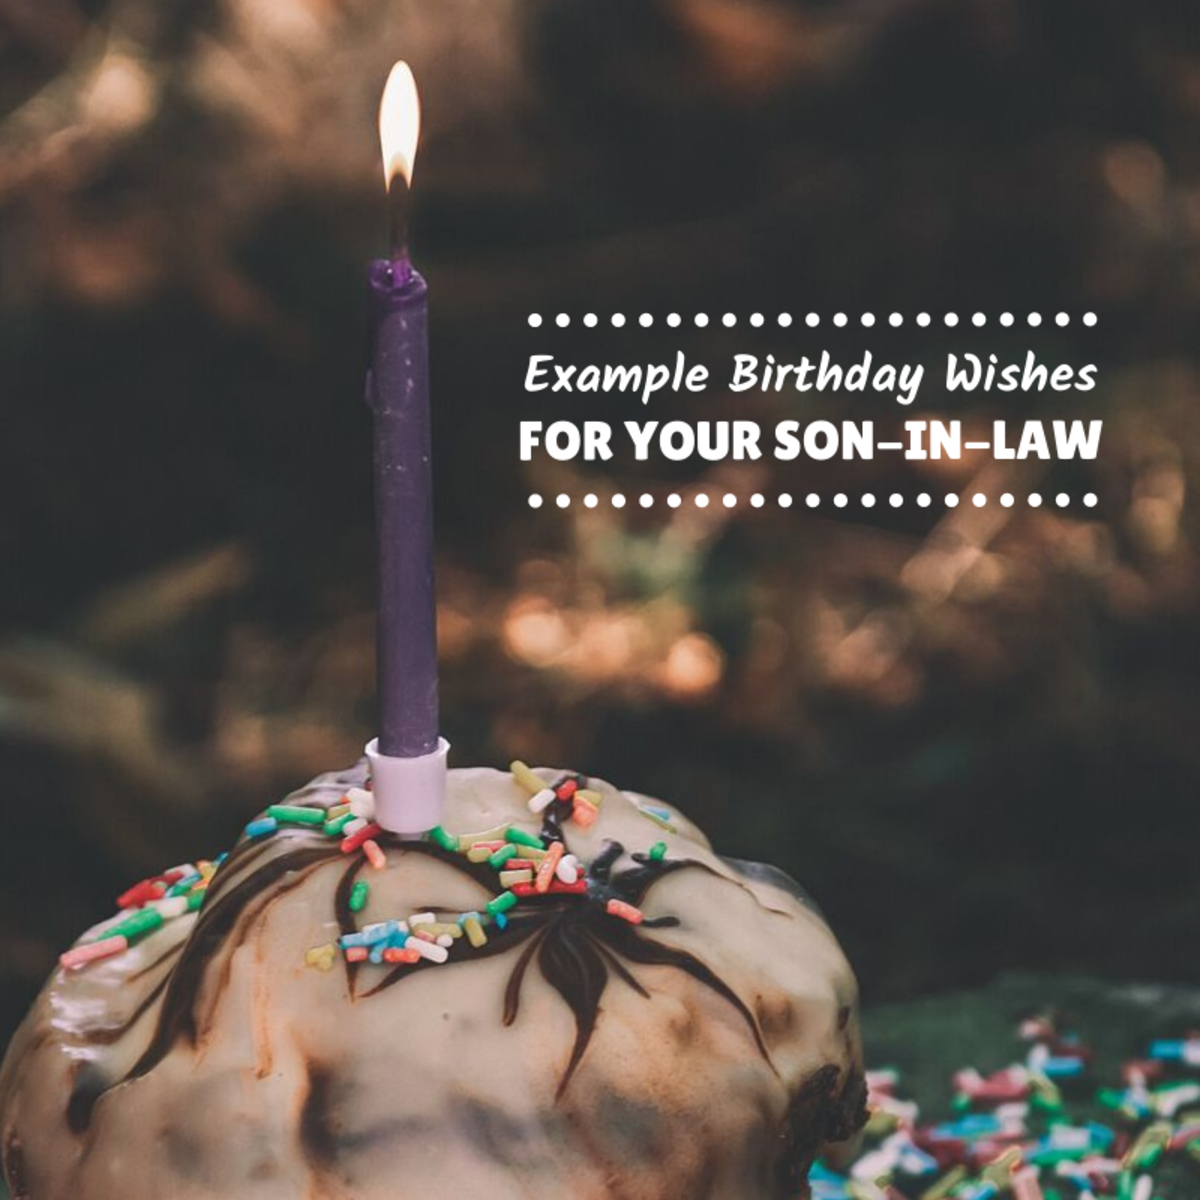 Finding the appropriate words for a birthday message to your son-in-law can be tricky. Use these tips and examples to get started. 